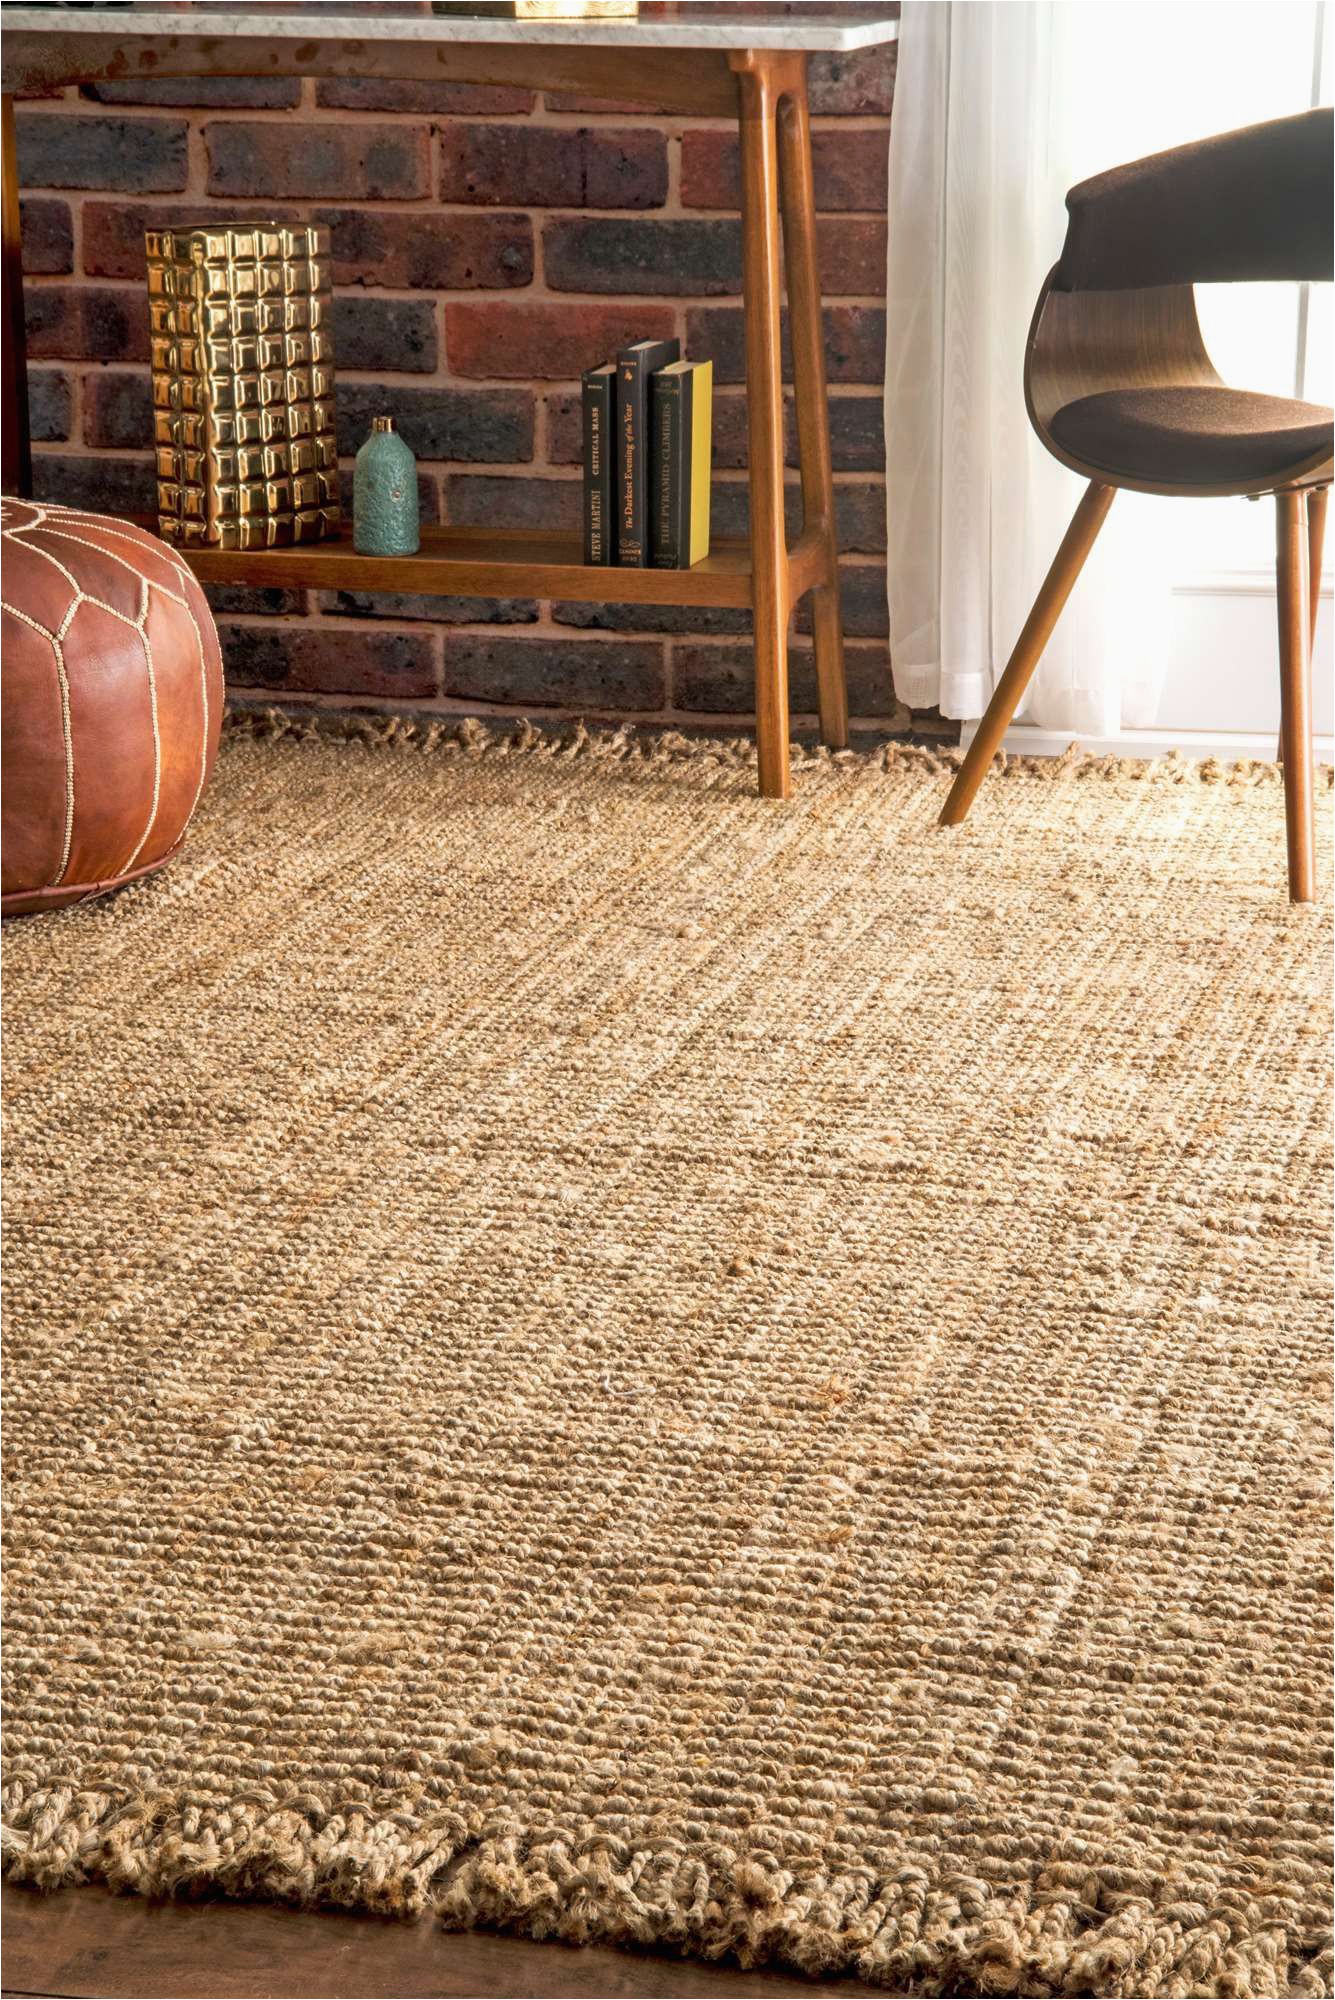 Organic area Rugs Made In Usa Eco Friendly organic and Made Of 100 Percent Jute these